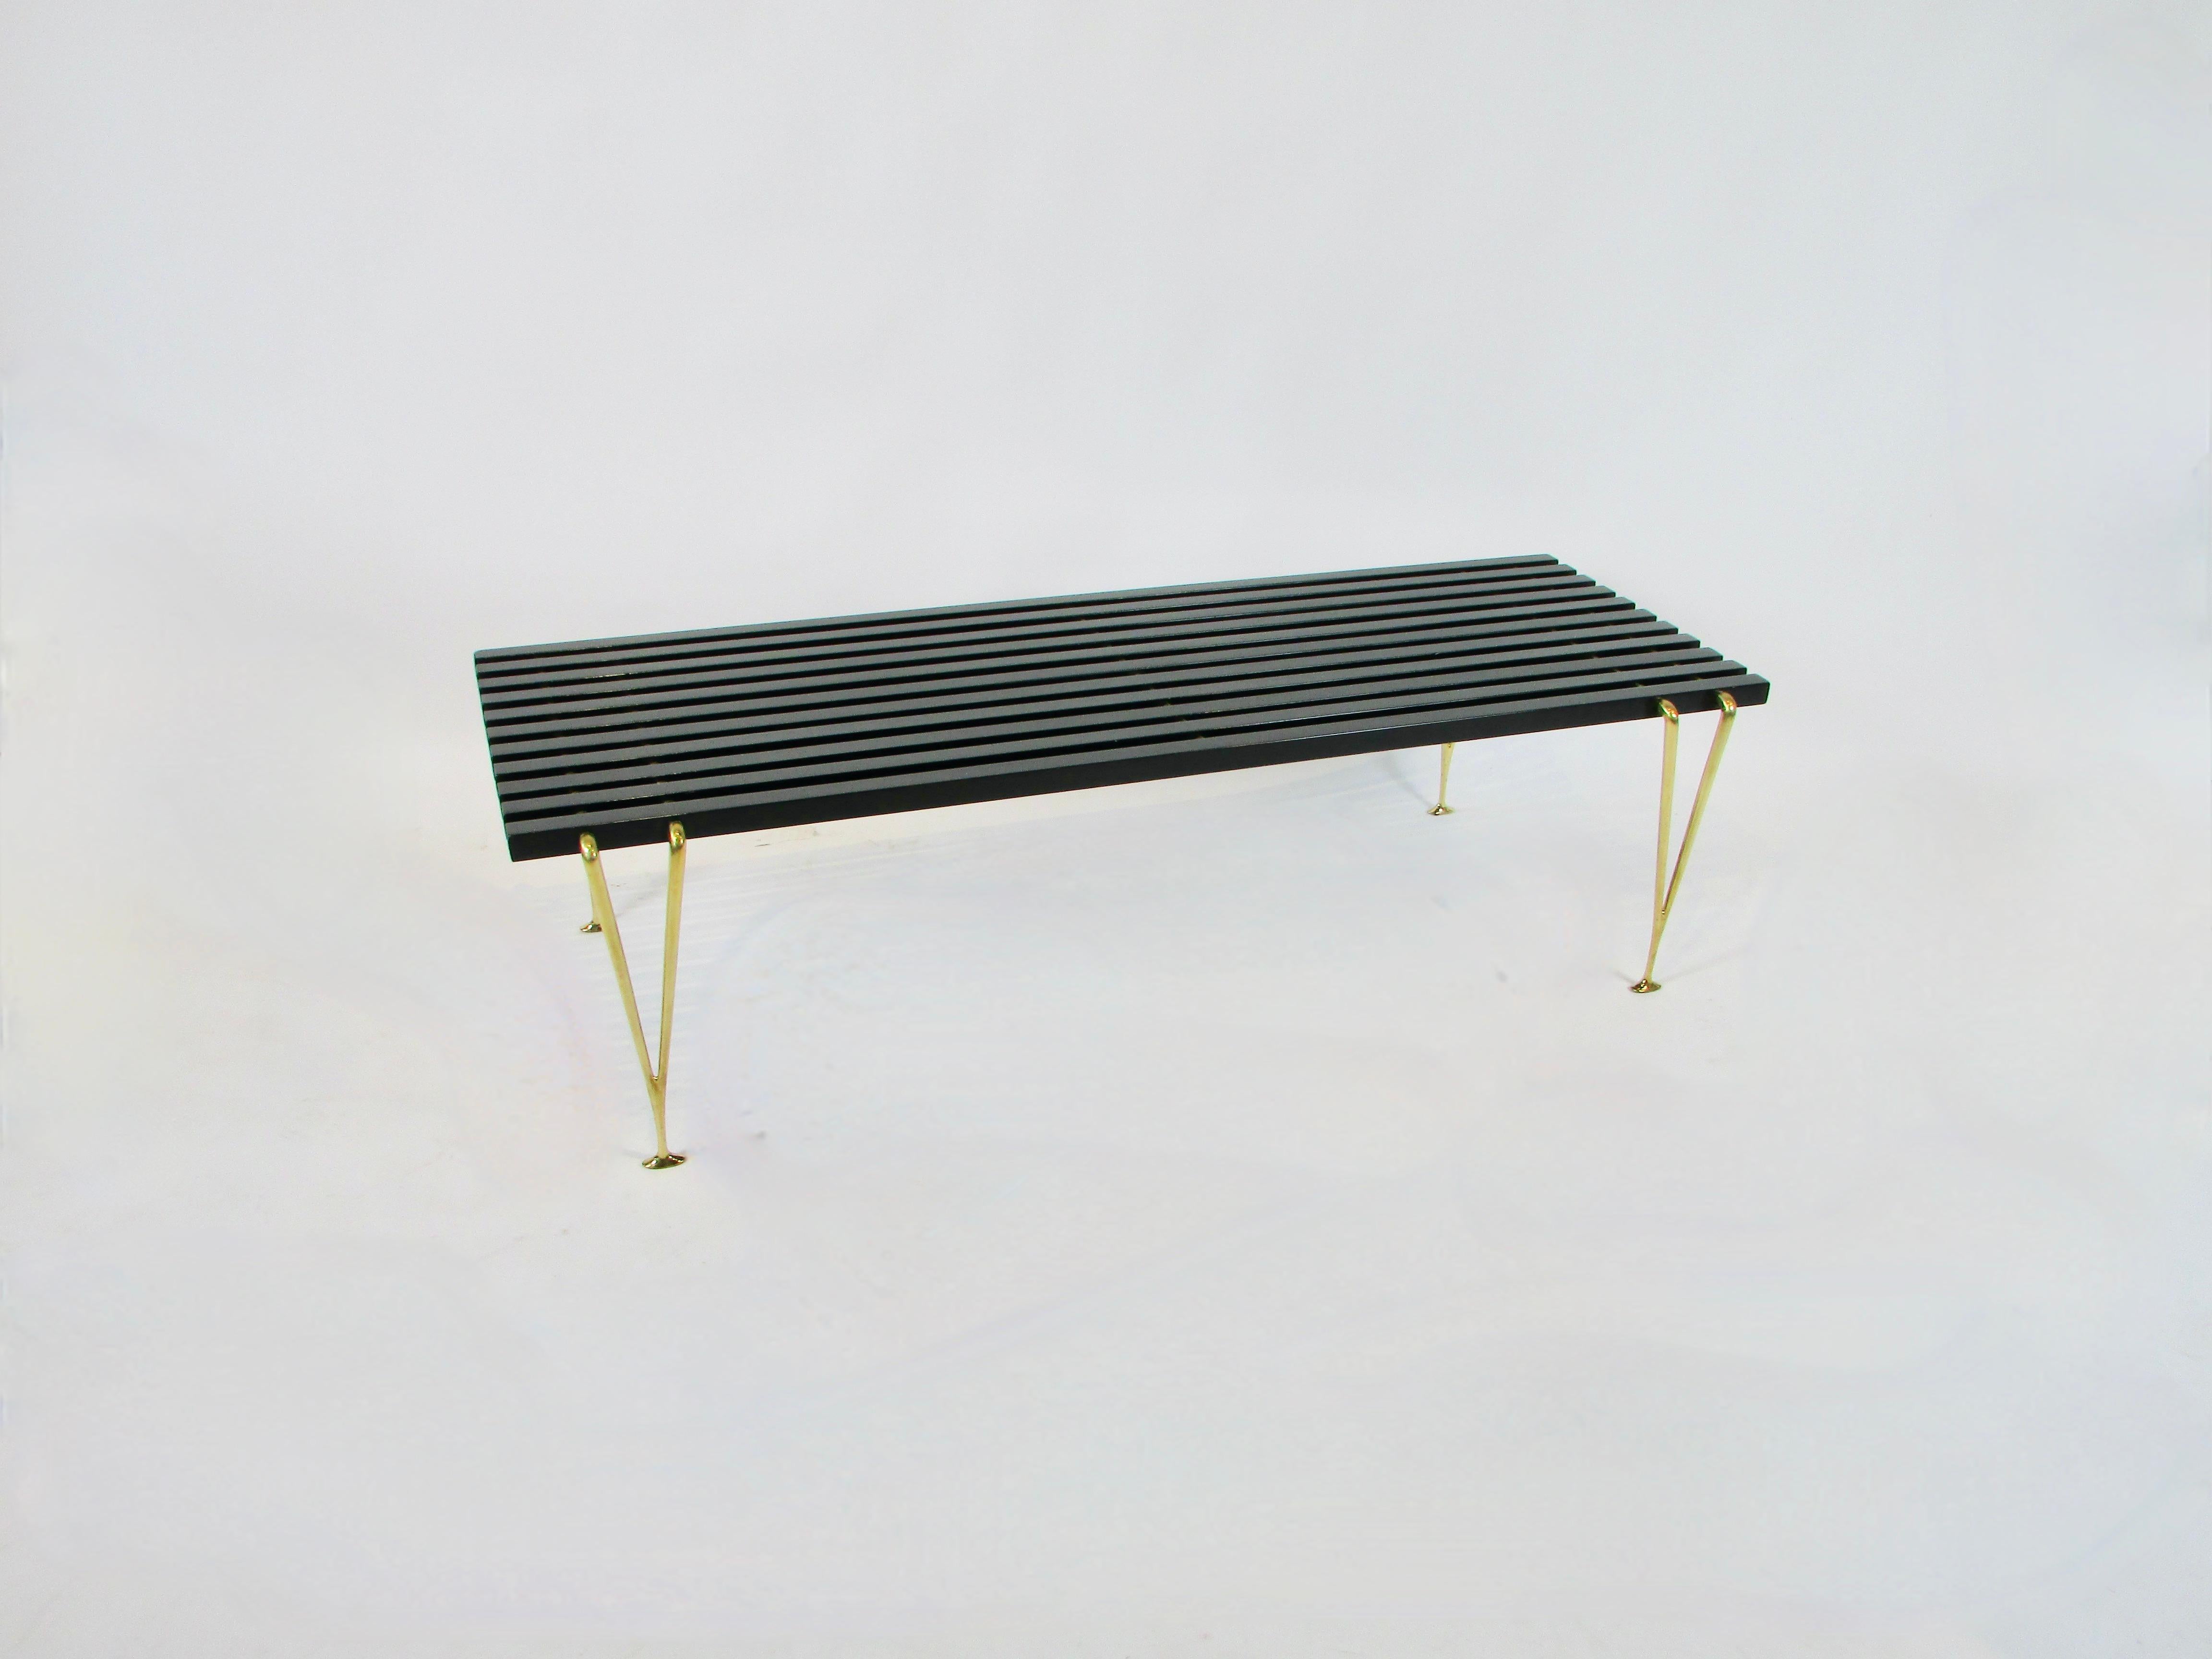 Slat  bench, designed and produced by Hugh Acton studio  / Hugh Acton Inc. Kalamazoo, Michigan, c. 1954. Black lacquered slats joined together with brass rod supported by polished brass legs .   